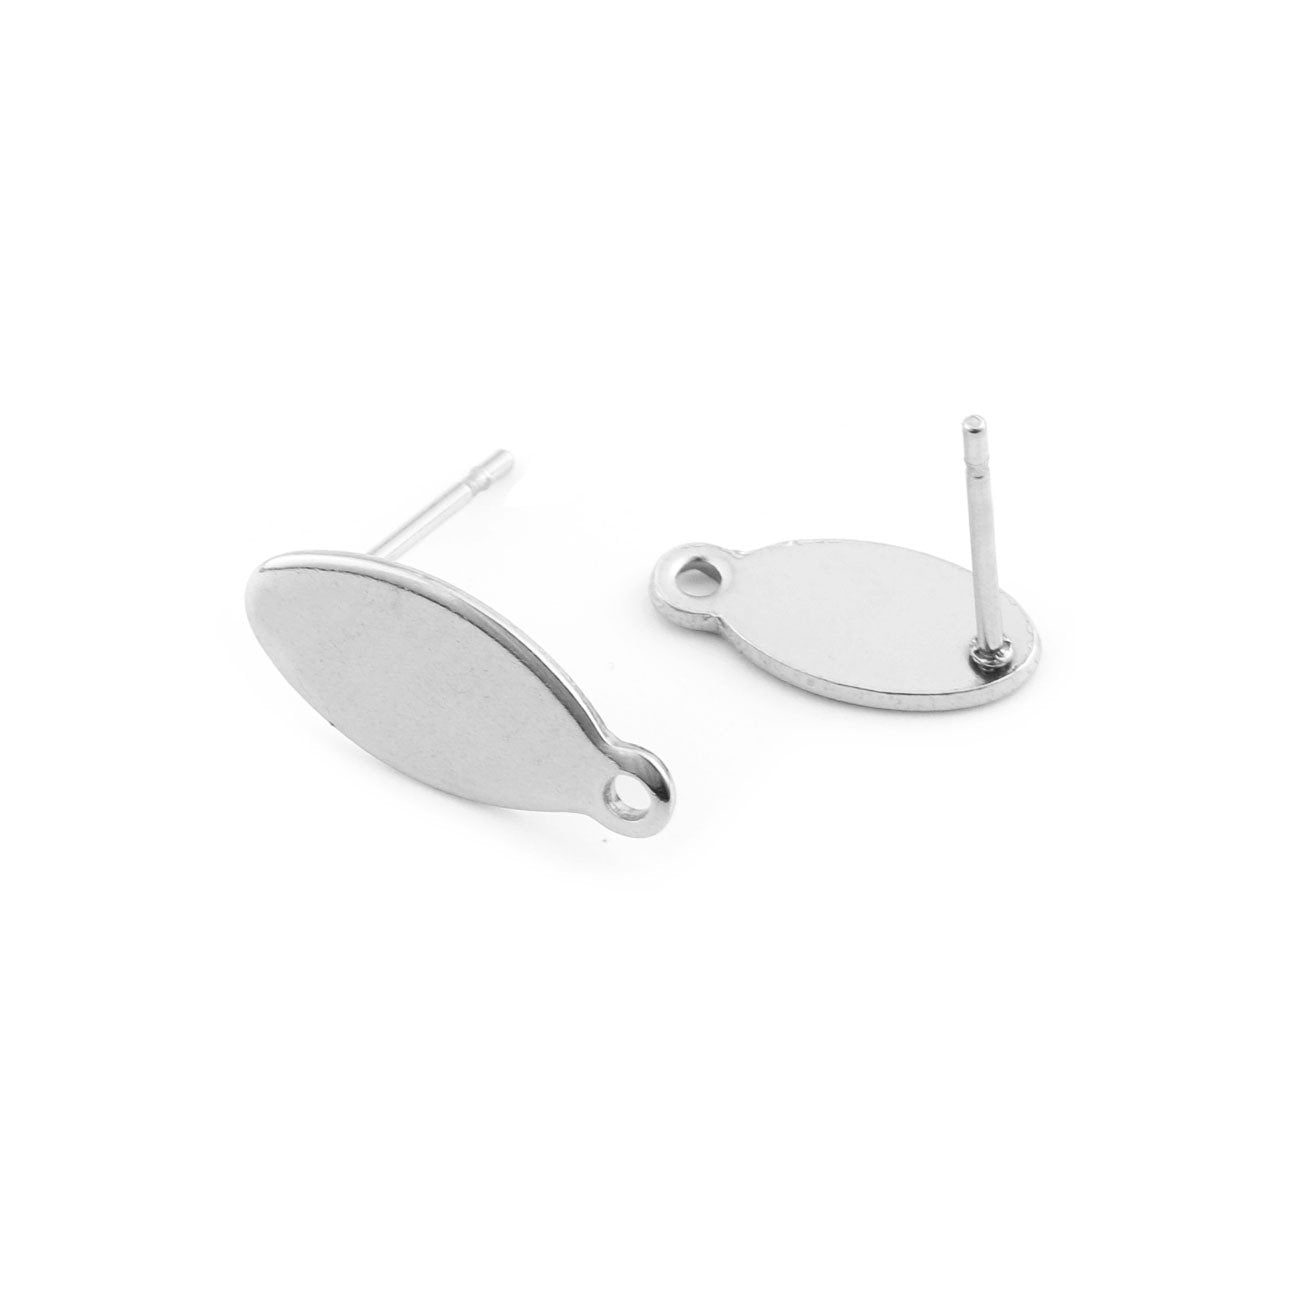 Stainless steel oval earring posts with hole